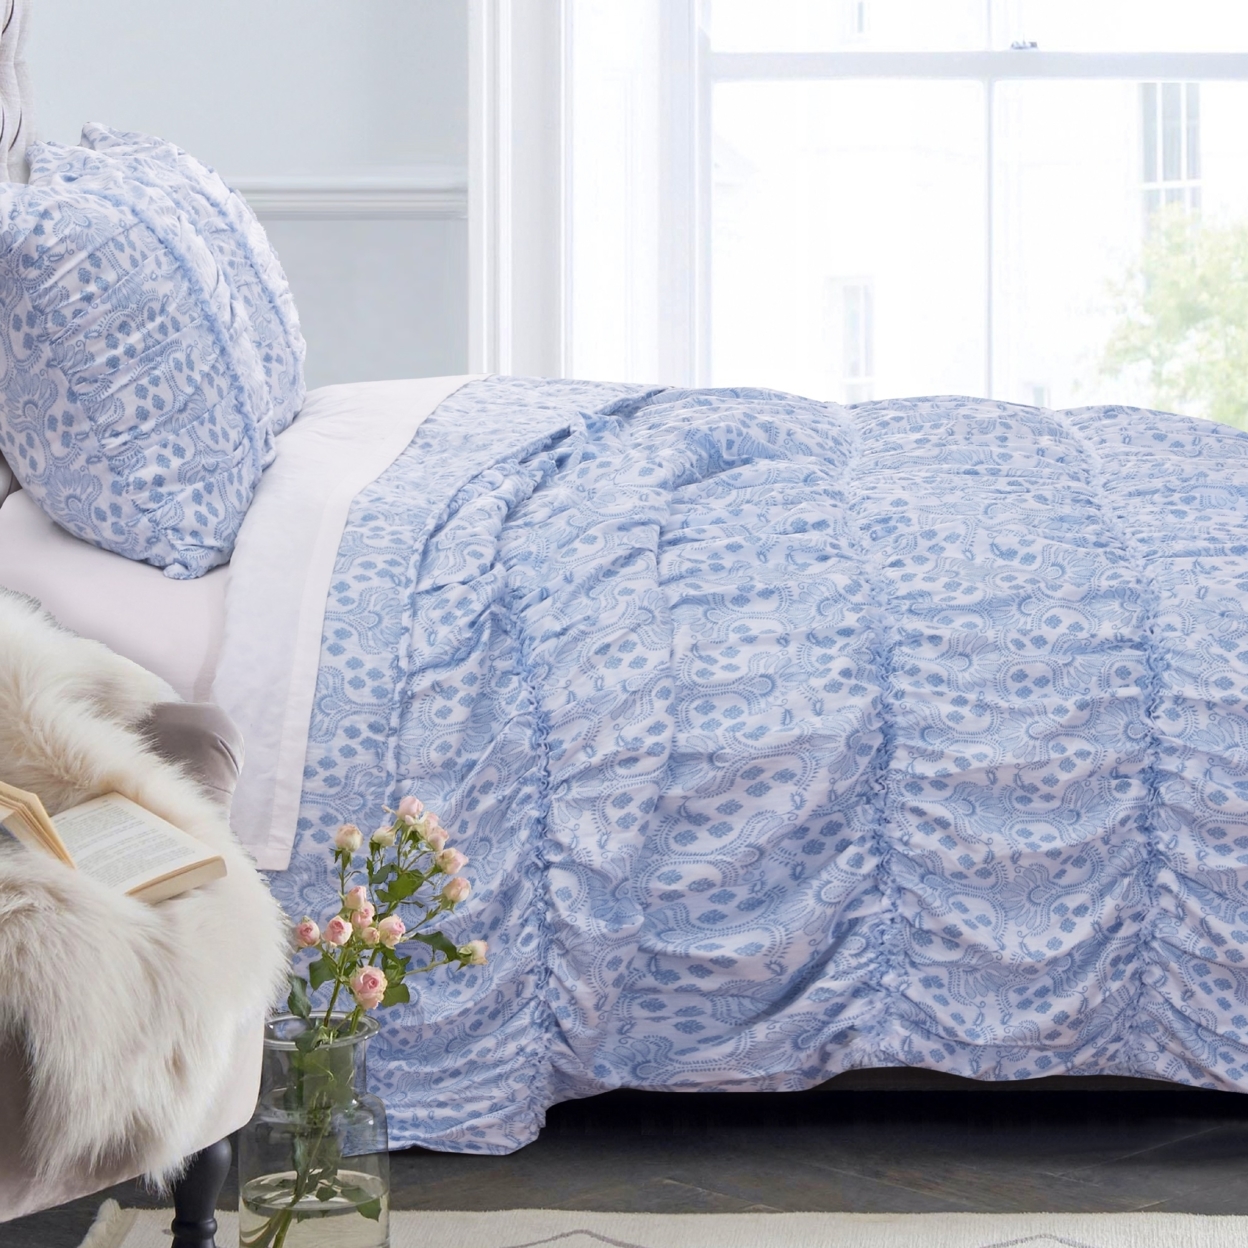 Fabric King Size Quilt Set With Pleated And Ruffled Details, Blue- Saltoro Sherpi